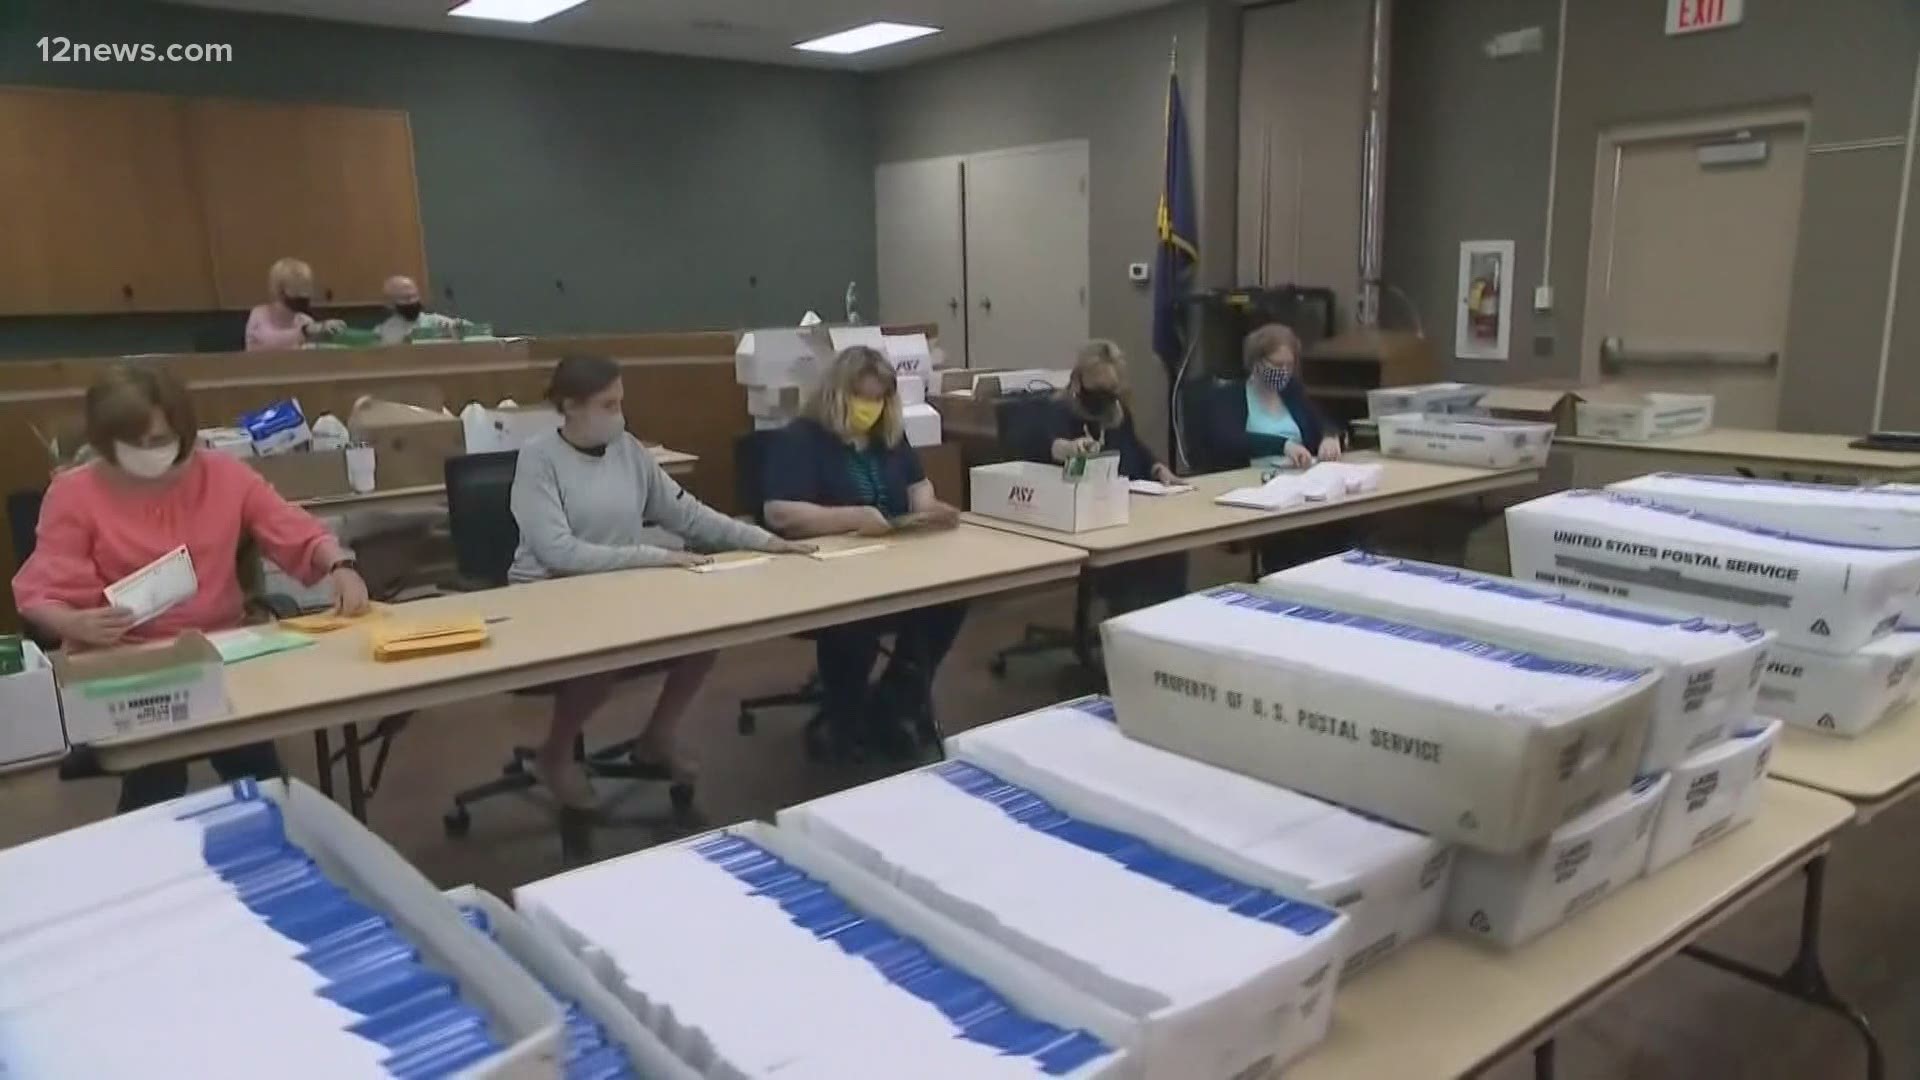 A ruling allows the Arizona Republican Party to inspect 2,5000 ballots for irregularities. The odds are still long this will change the outcome of the election.